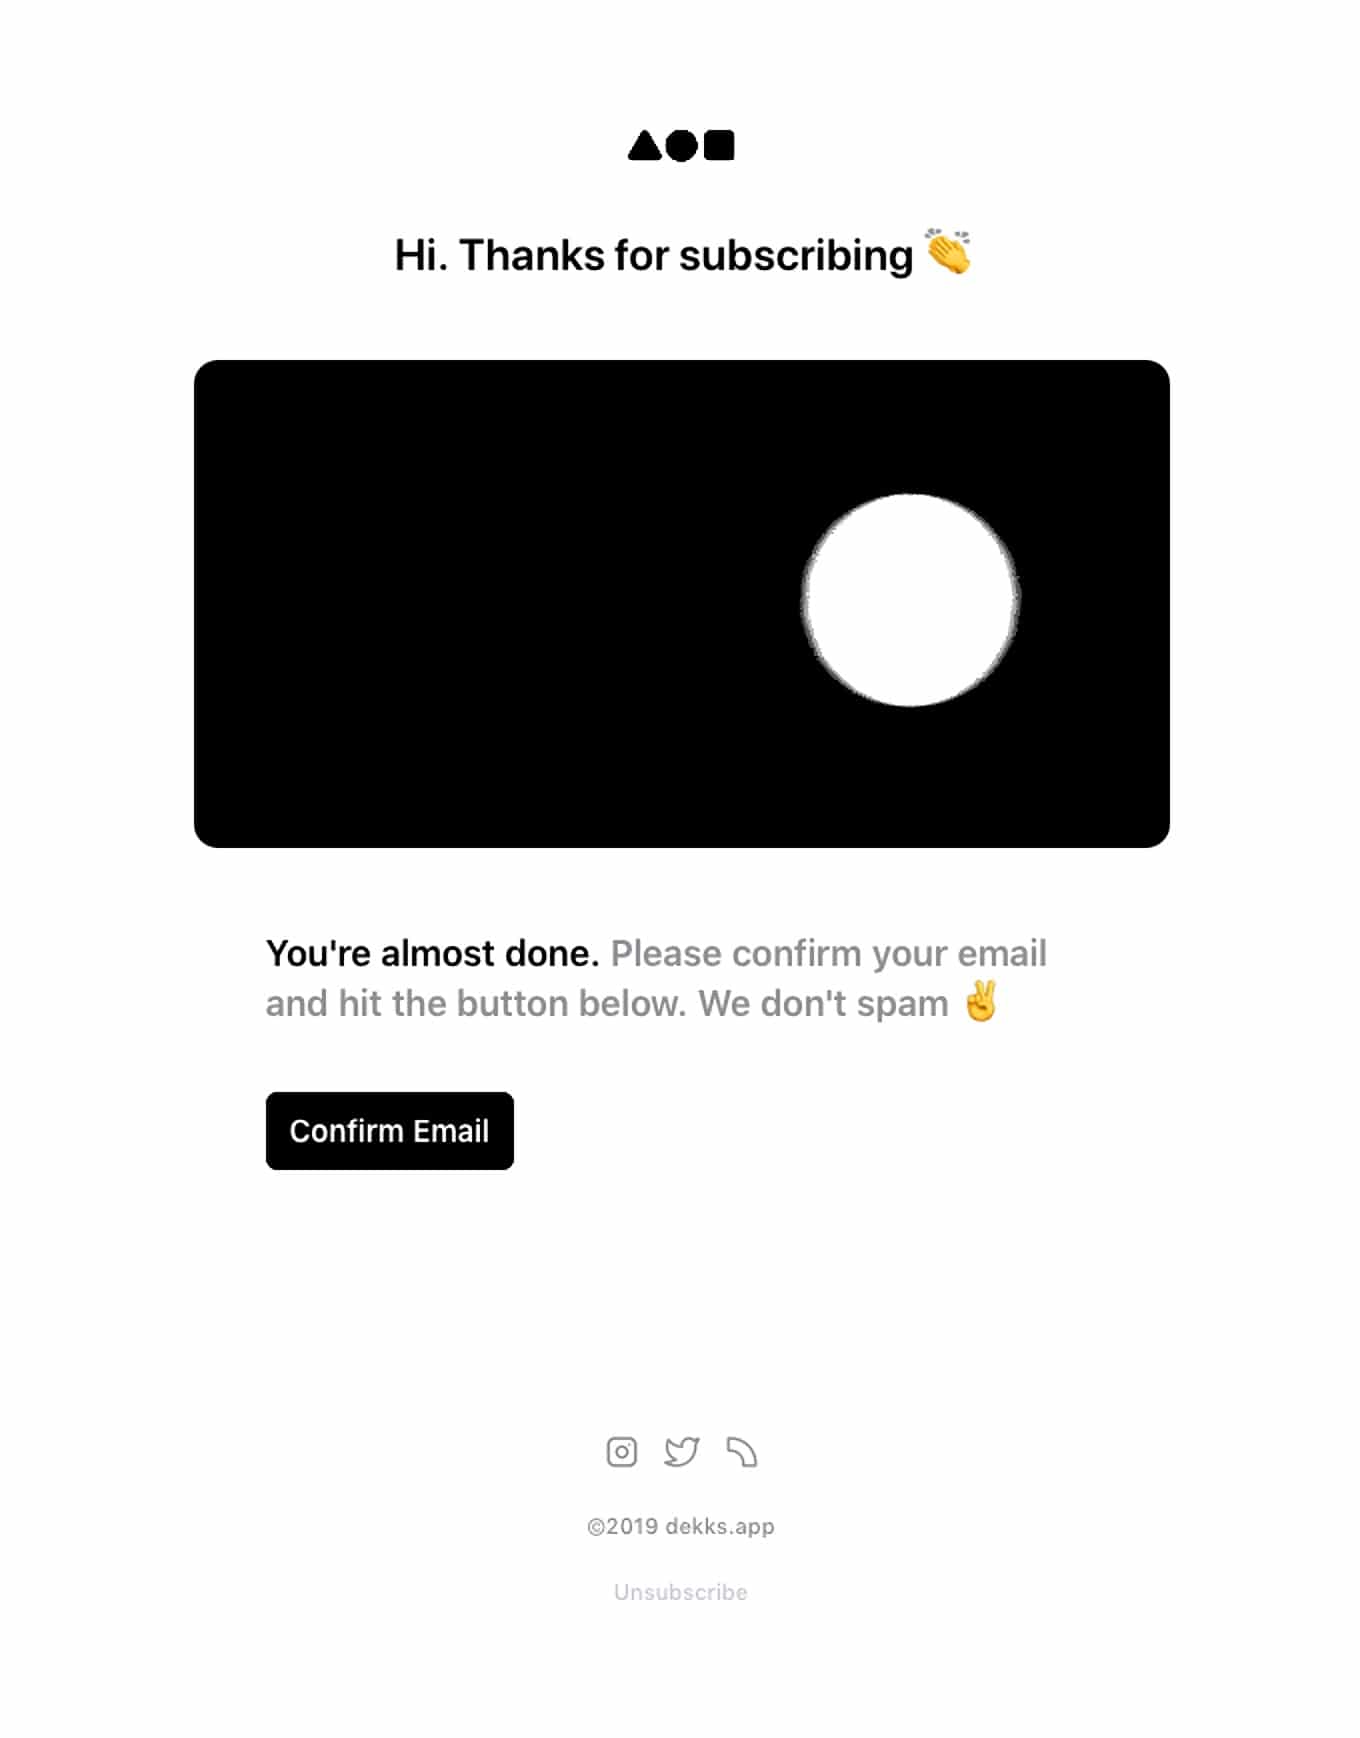 Example of an automated thank you message for new subscribers